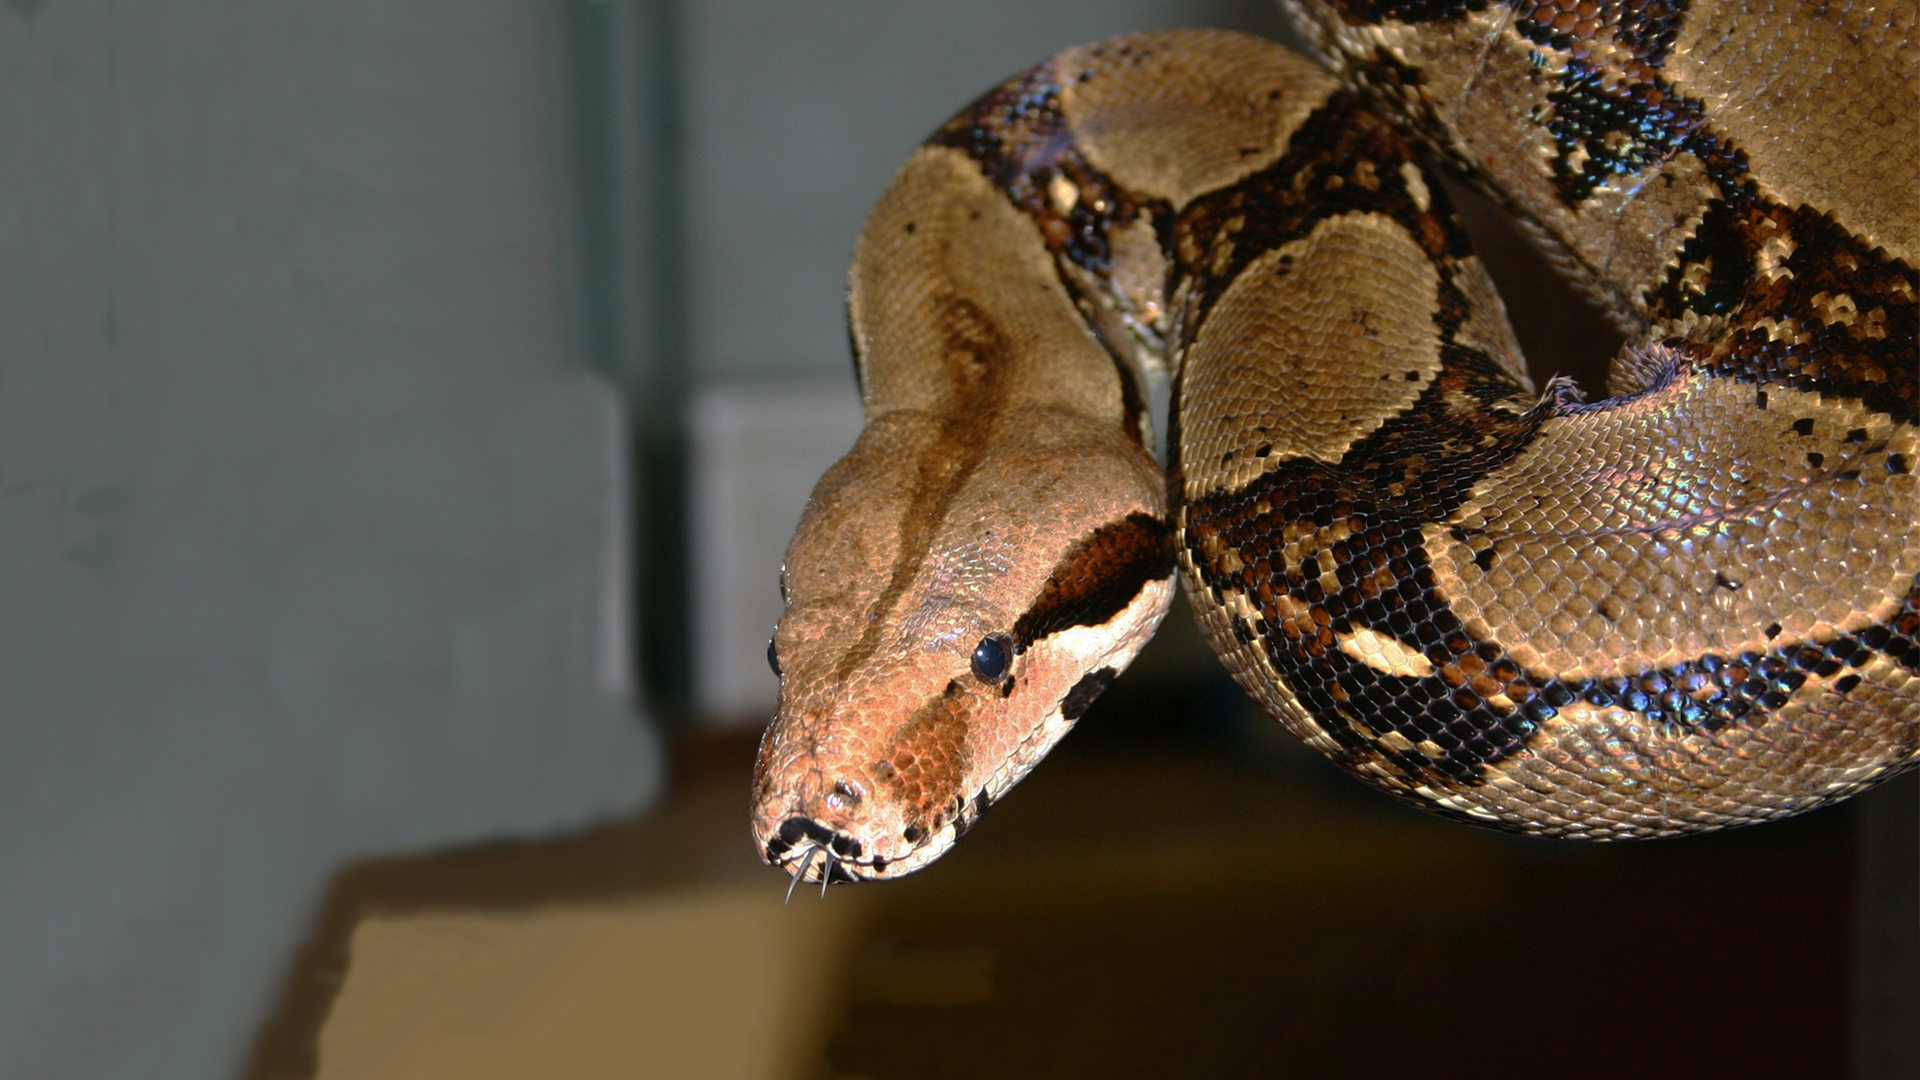 Red-tailed Boa Constrictor - Elmwood Park Zoo.